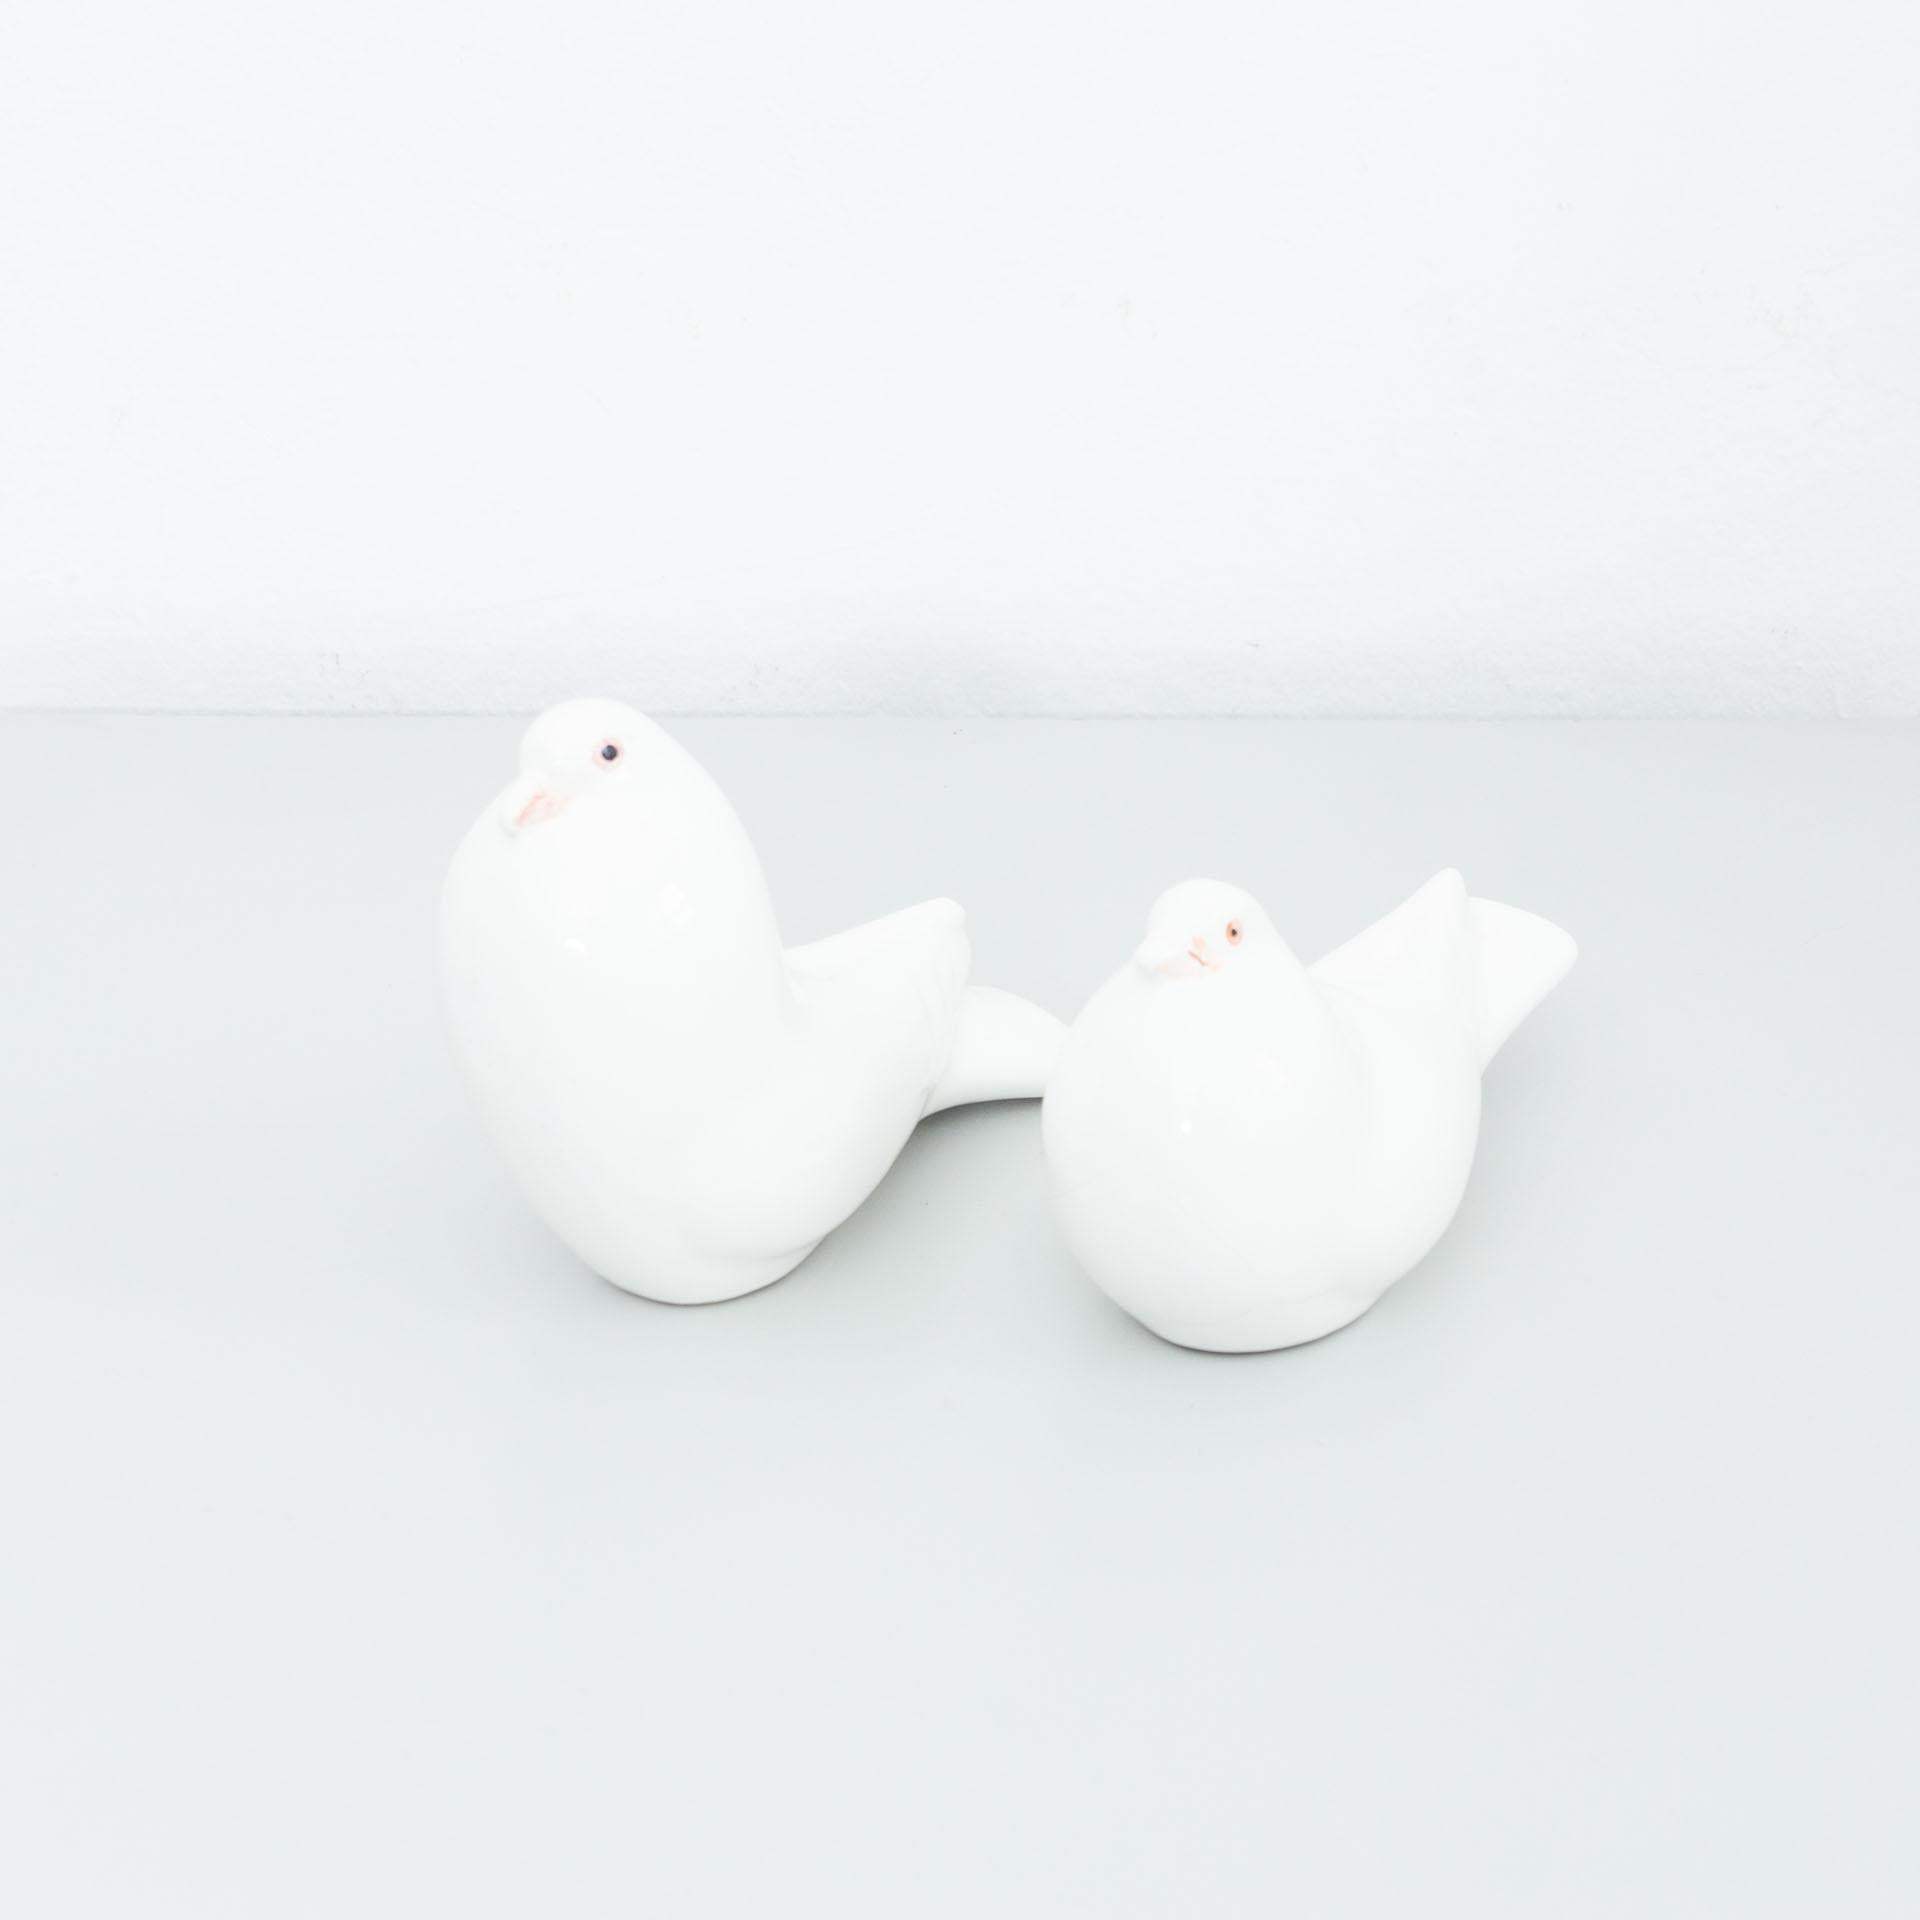 Set of two ceramic pigeon sculptures.
By unknown manufactured from Italy, circa 1970.

In original condition, with minor wear consistent with age and use, preserving a beautiful patina.

Material:
Ceramic

Dimensions:
 D 26.5 cm x W 11 cm x